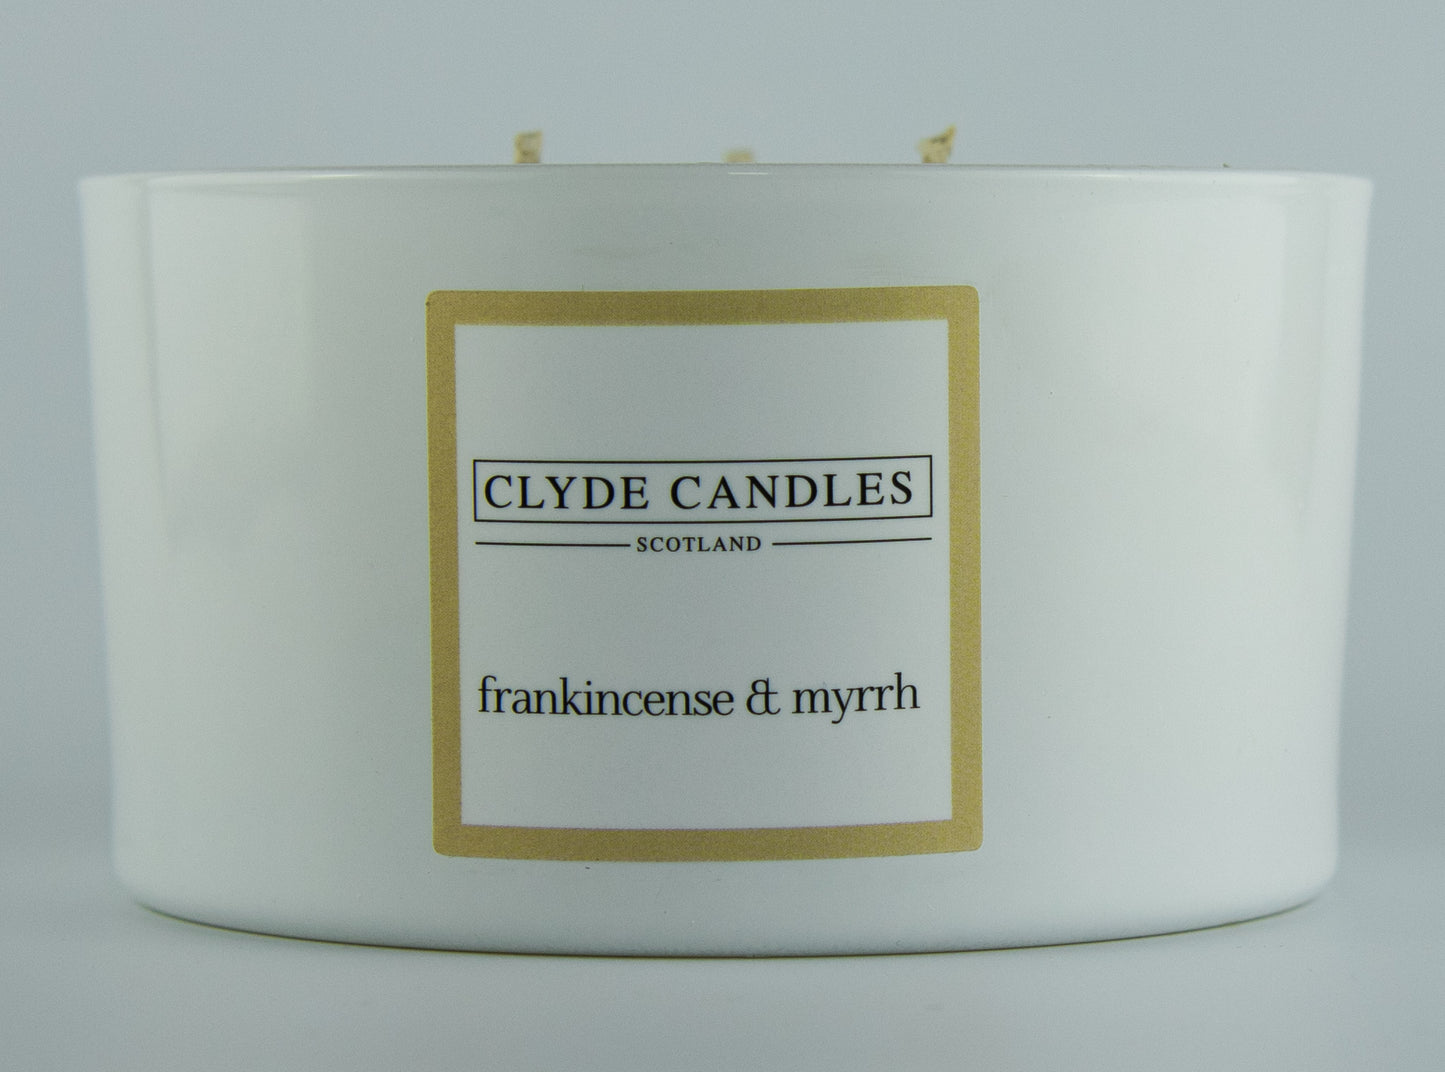 frankincense and myrrh Scented Candle Gift Box Three Wicks, Natural Soy wax, Scottish Candles, Clyde Candles, Christmas Candle, Christmas Gift,